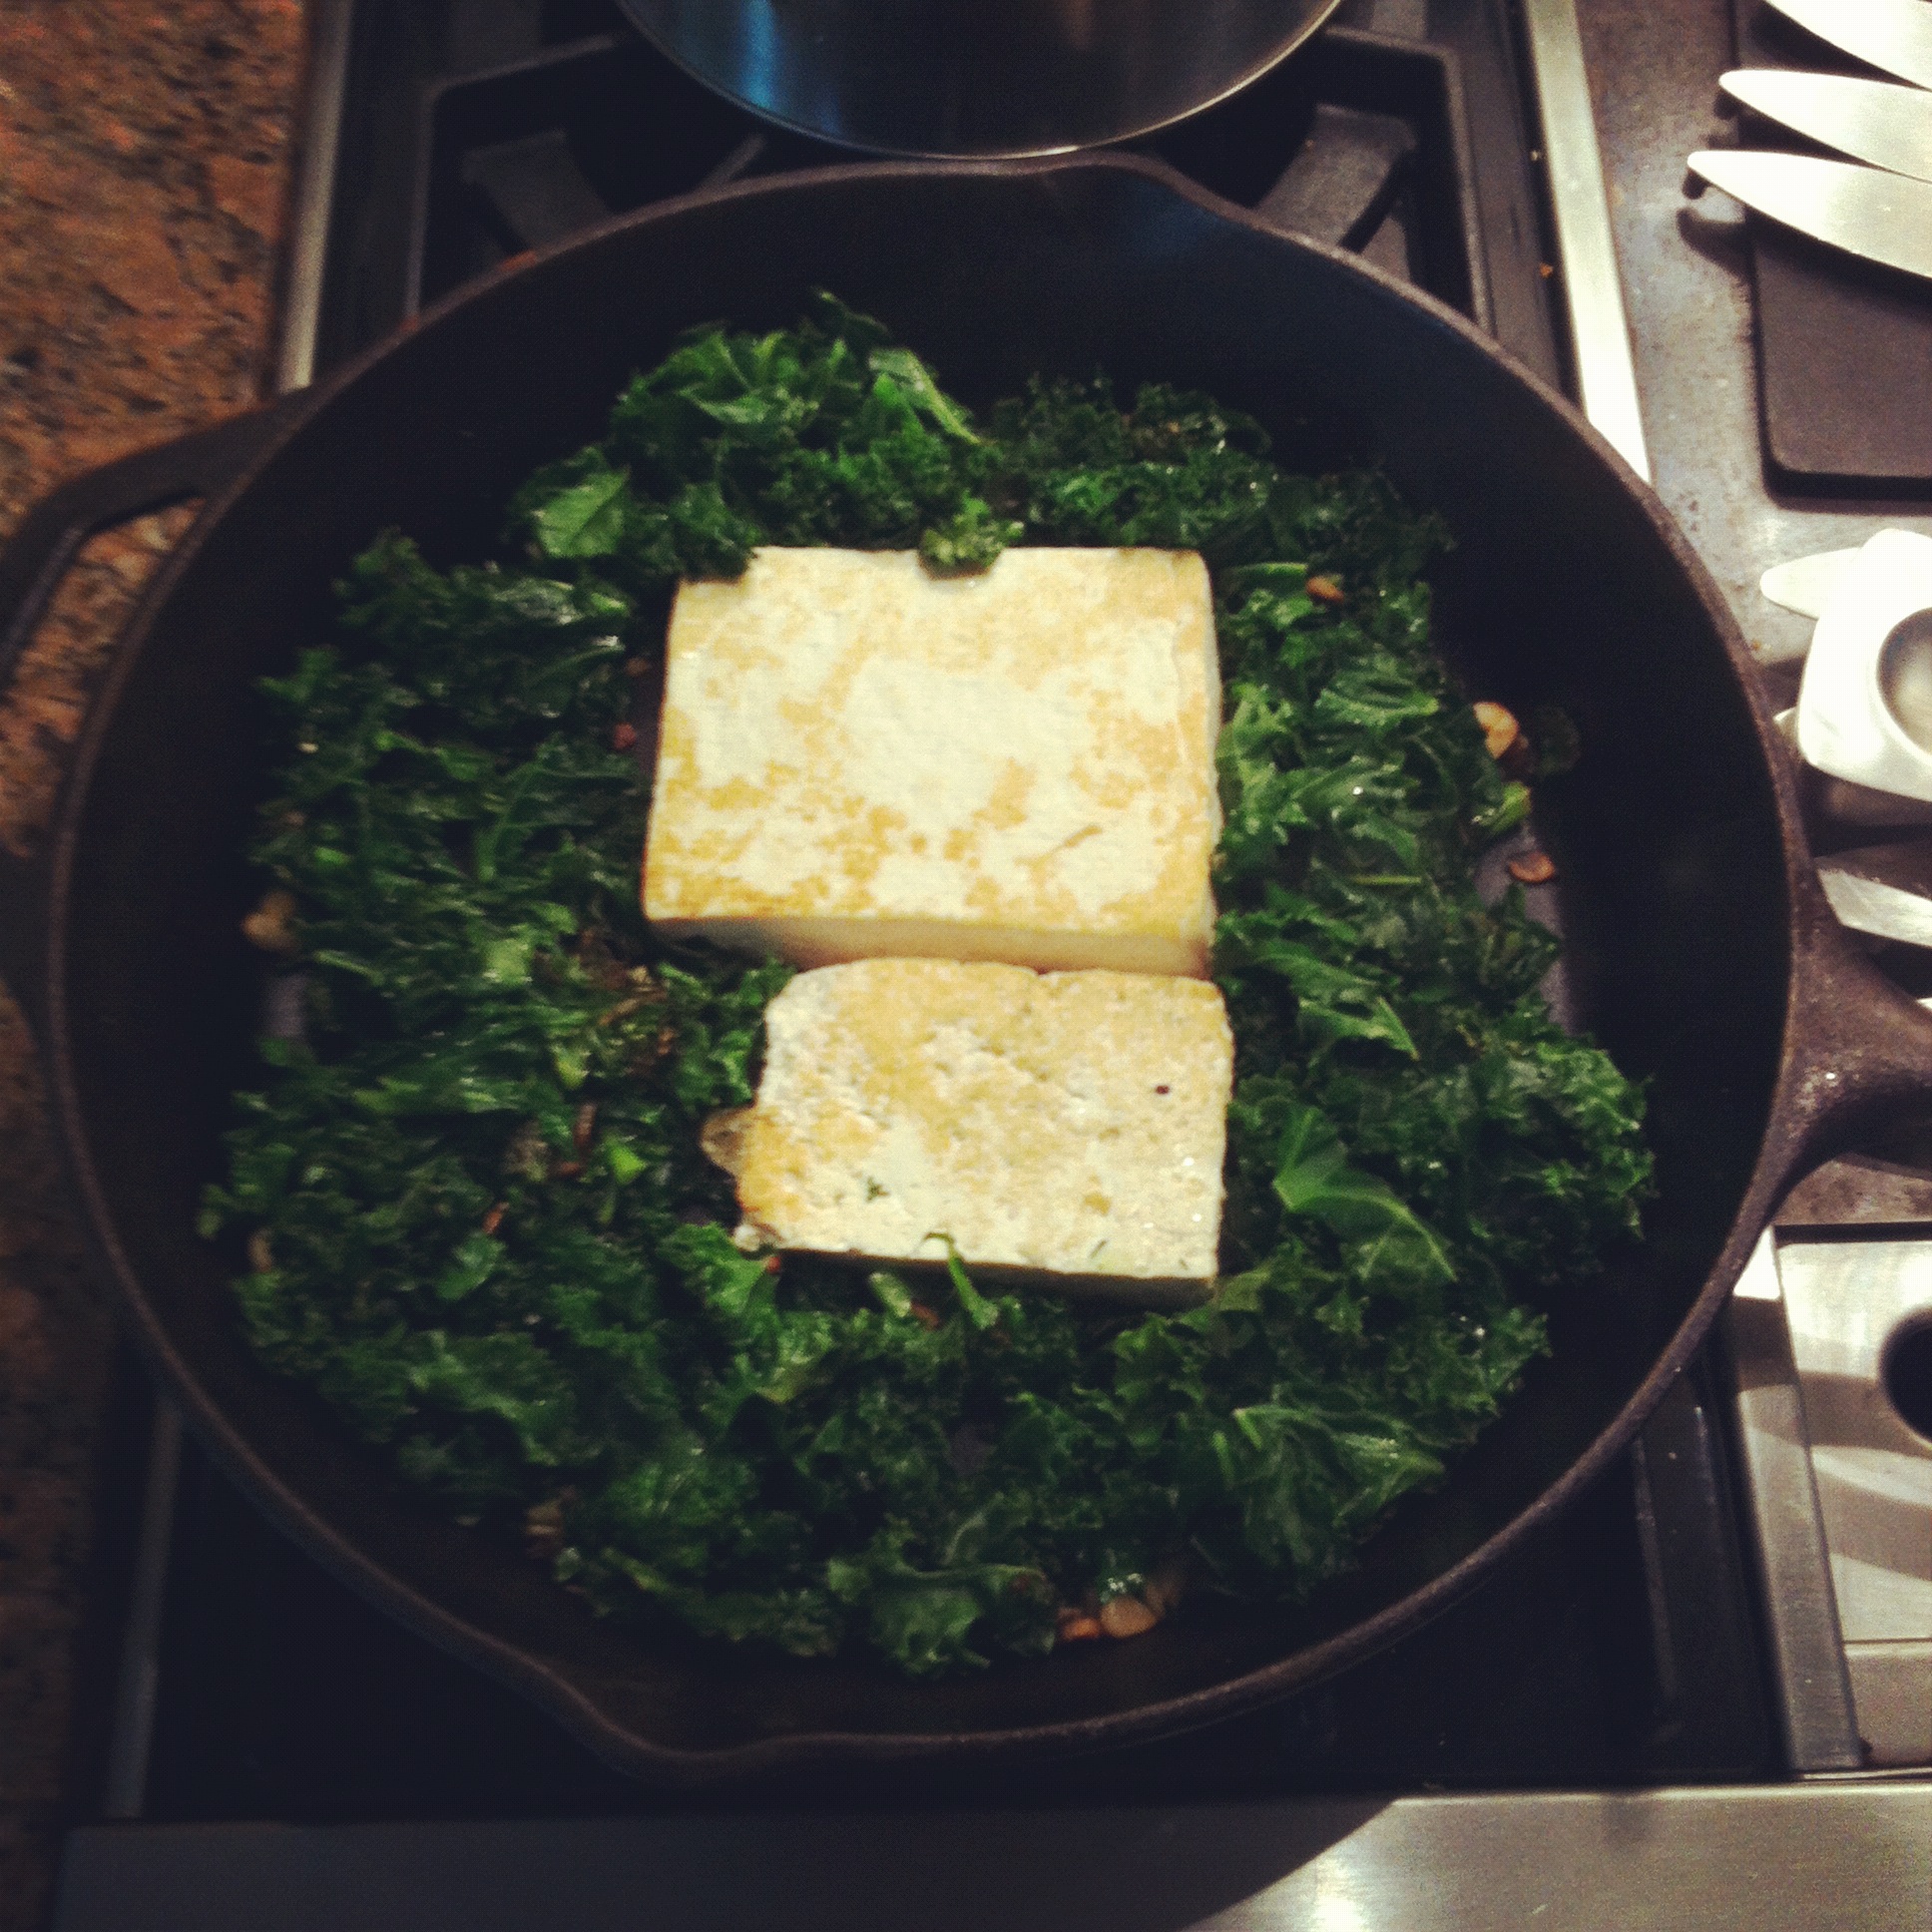 This breakfast of greens and tofu and sprouted toast is vegan and delicious.